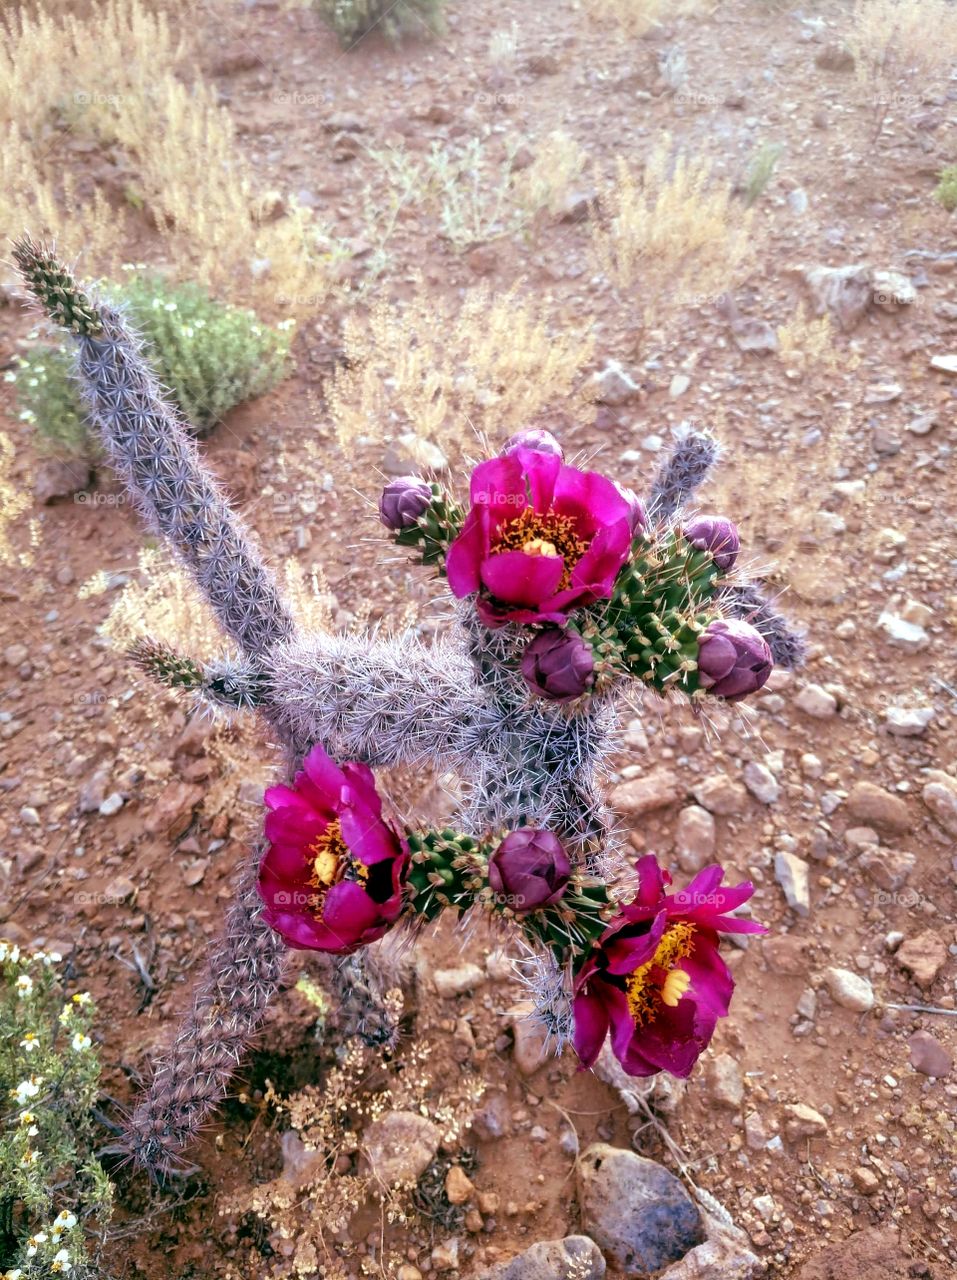 Cactus with 3 pink flowers